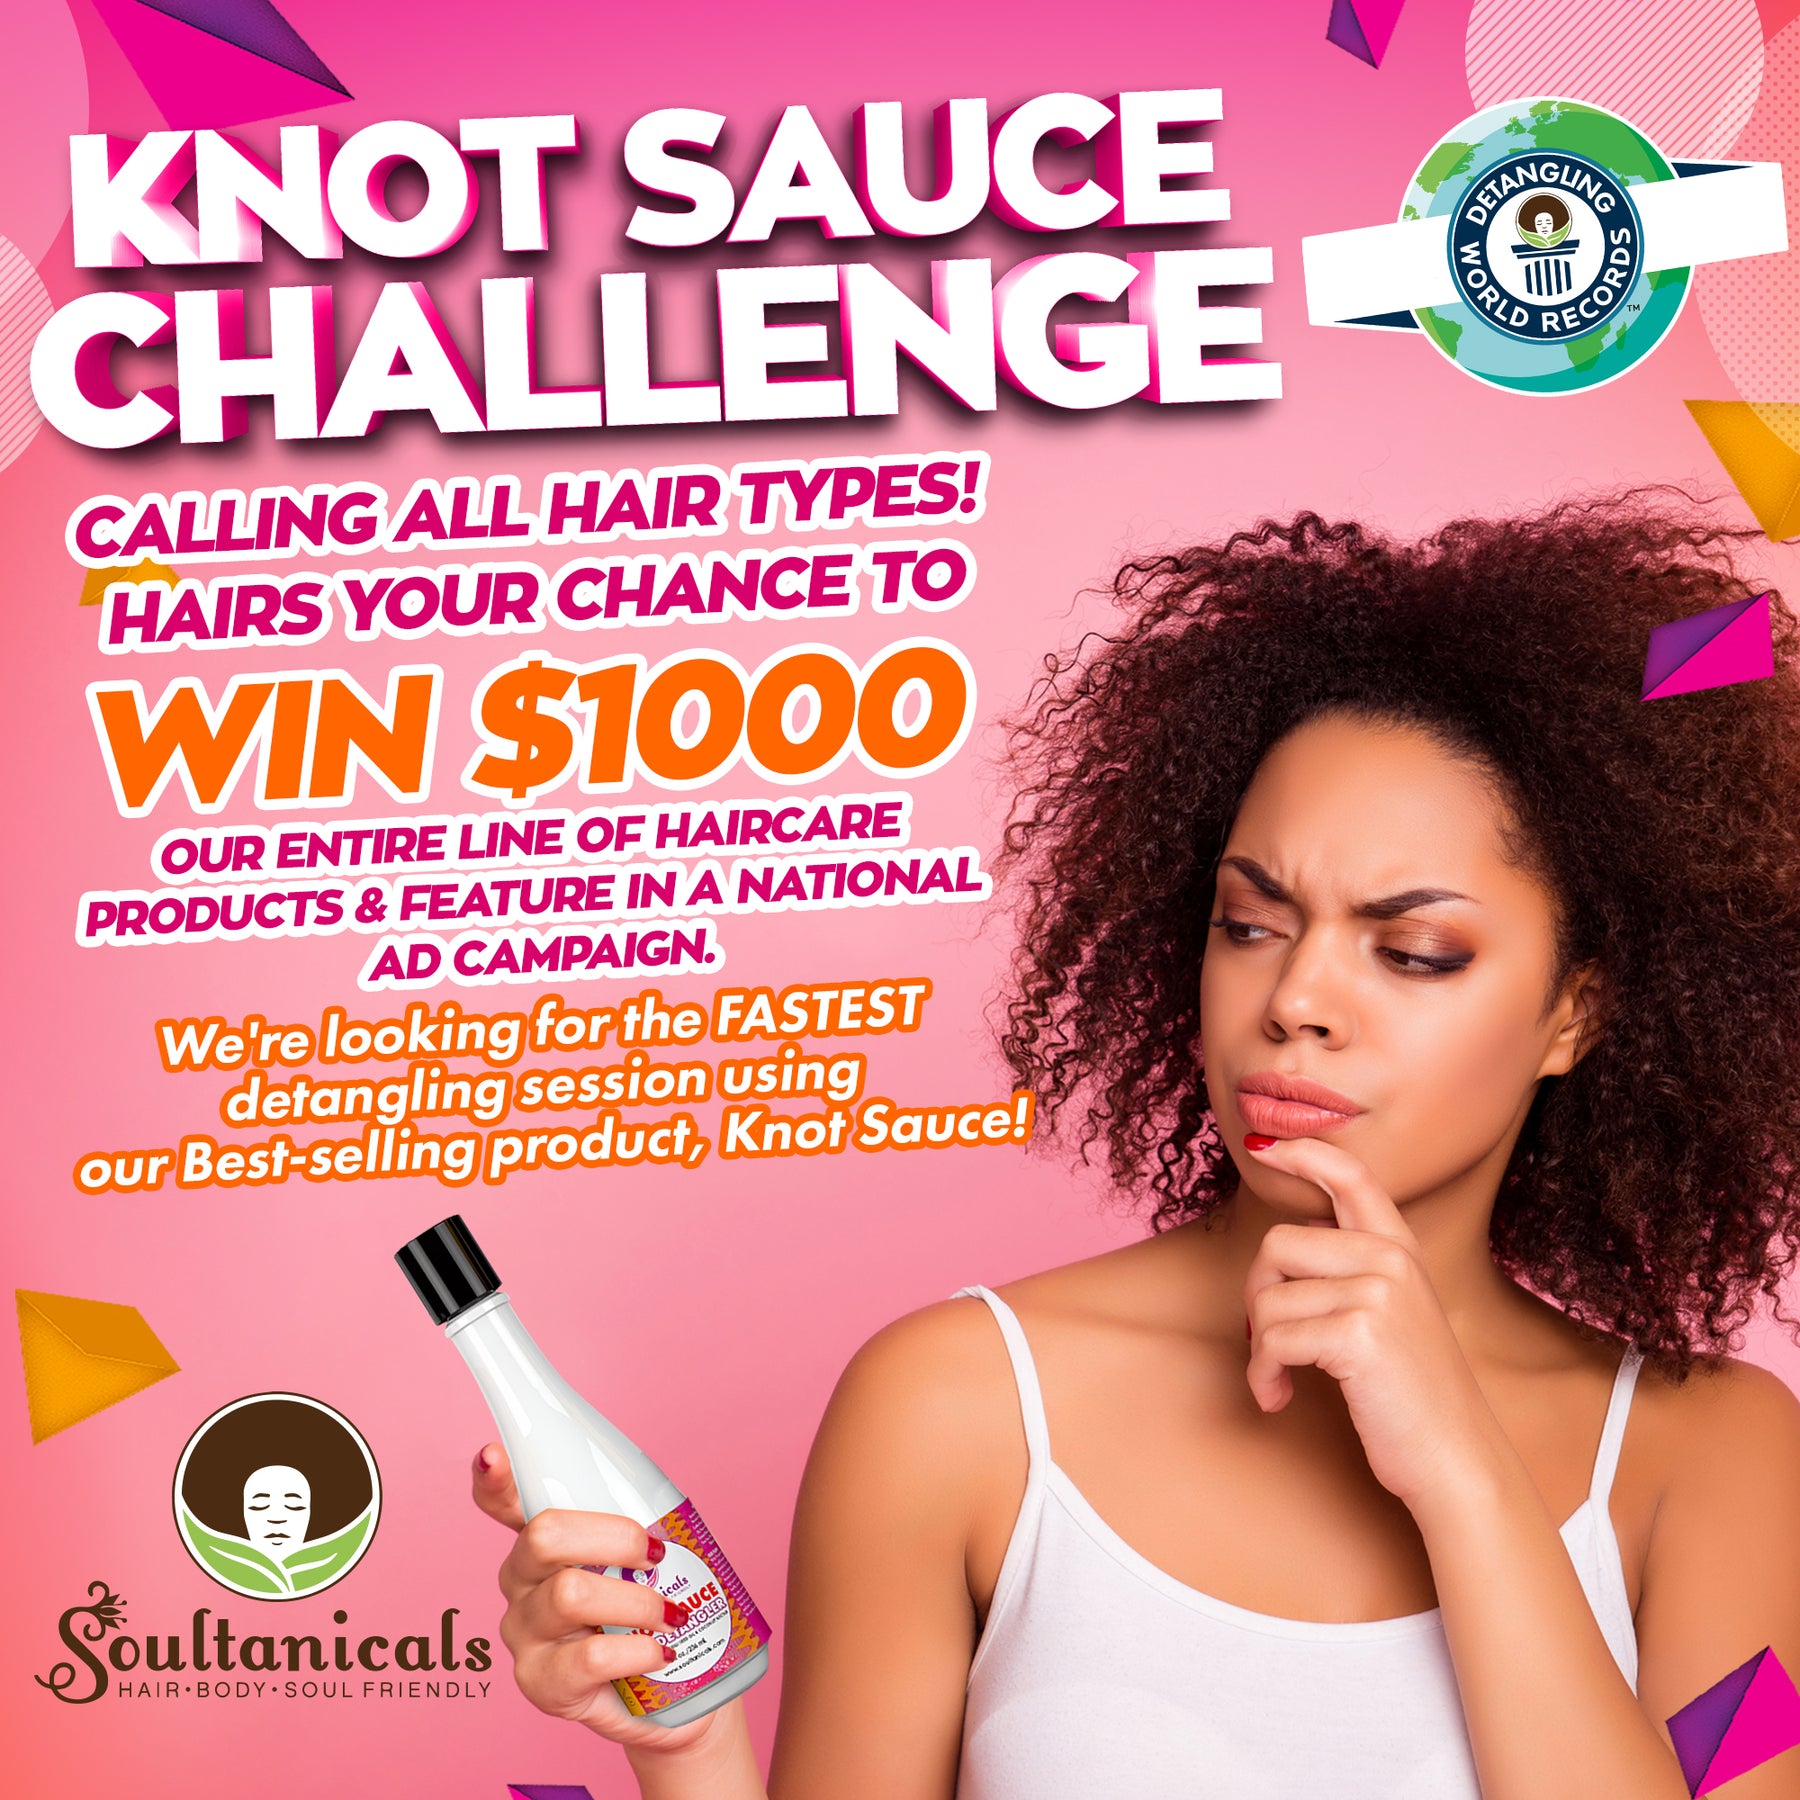 Join the Knot Sauce Challenge today! Win $1,000 and other prizes!